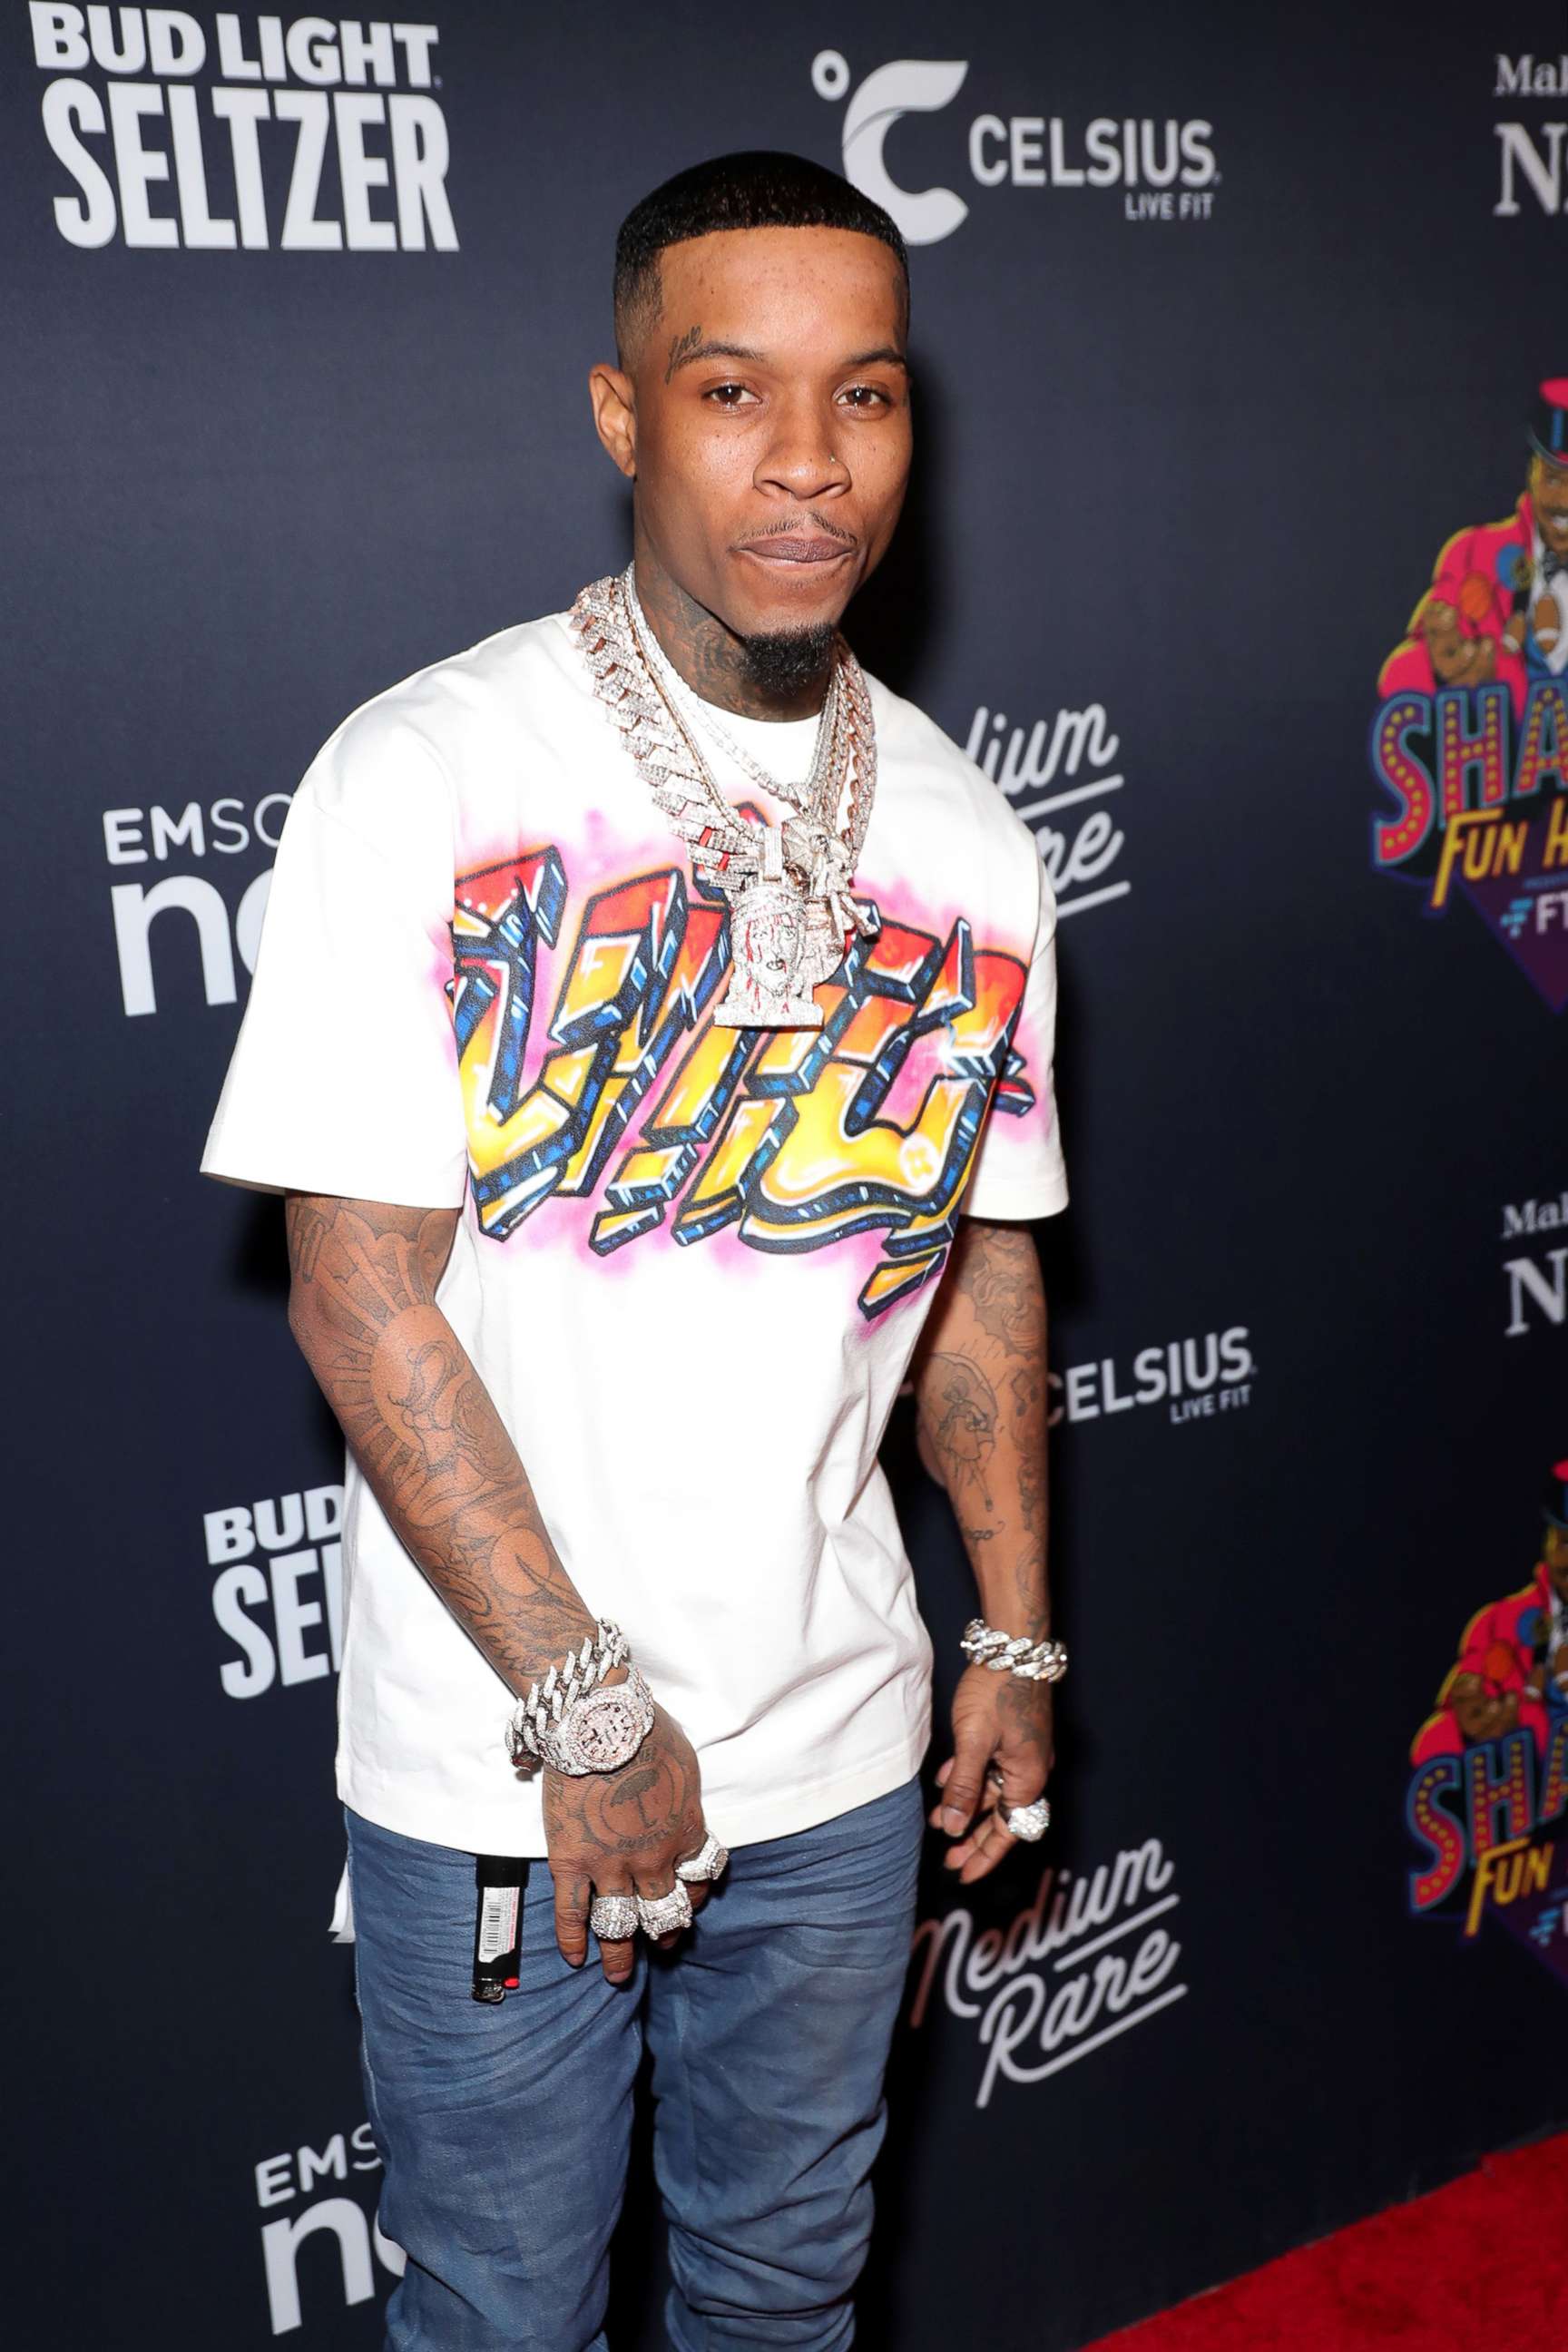 PHOTO: In this Feb. 11, 2022, file photo, Tory Lanez attends an event in Los Angeles.